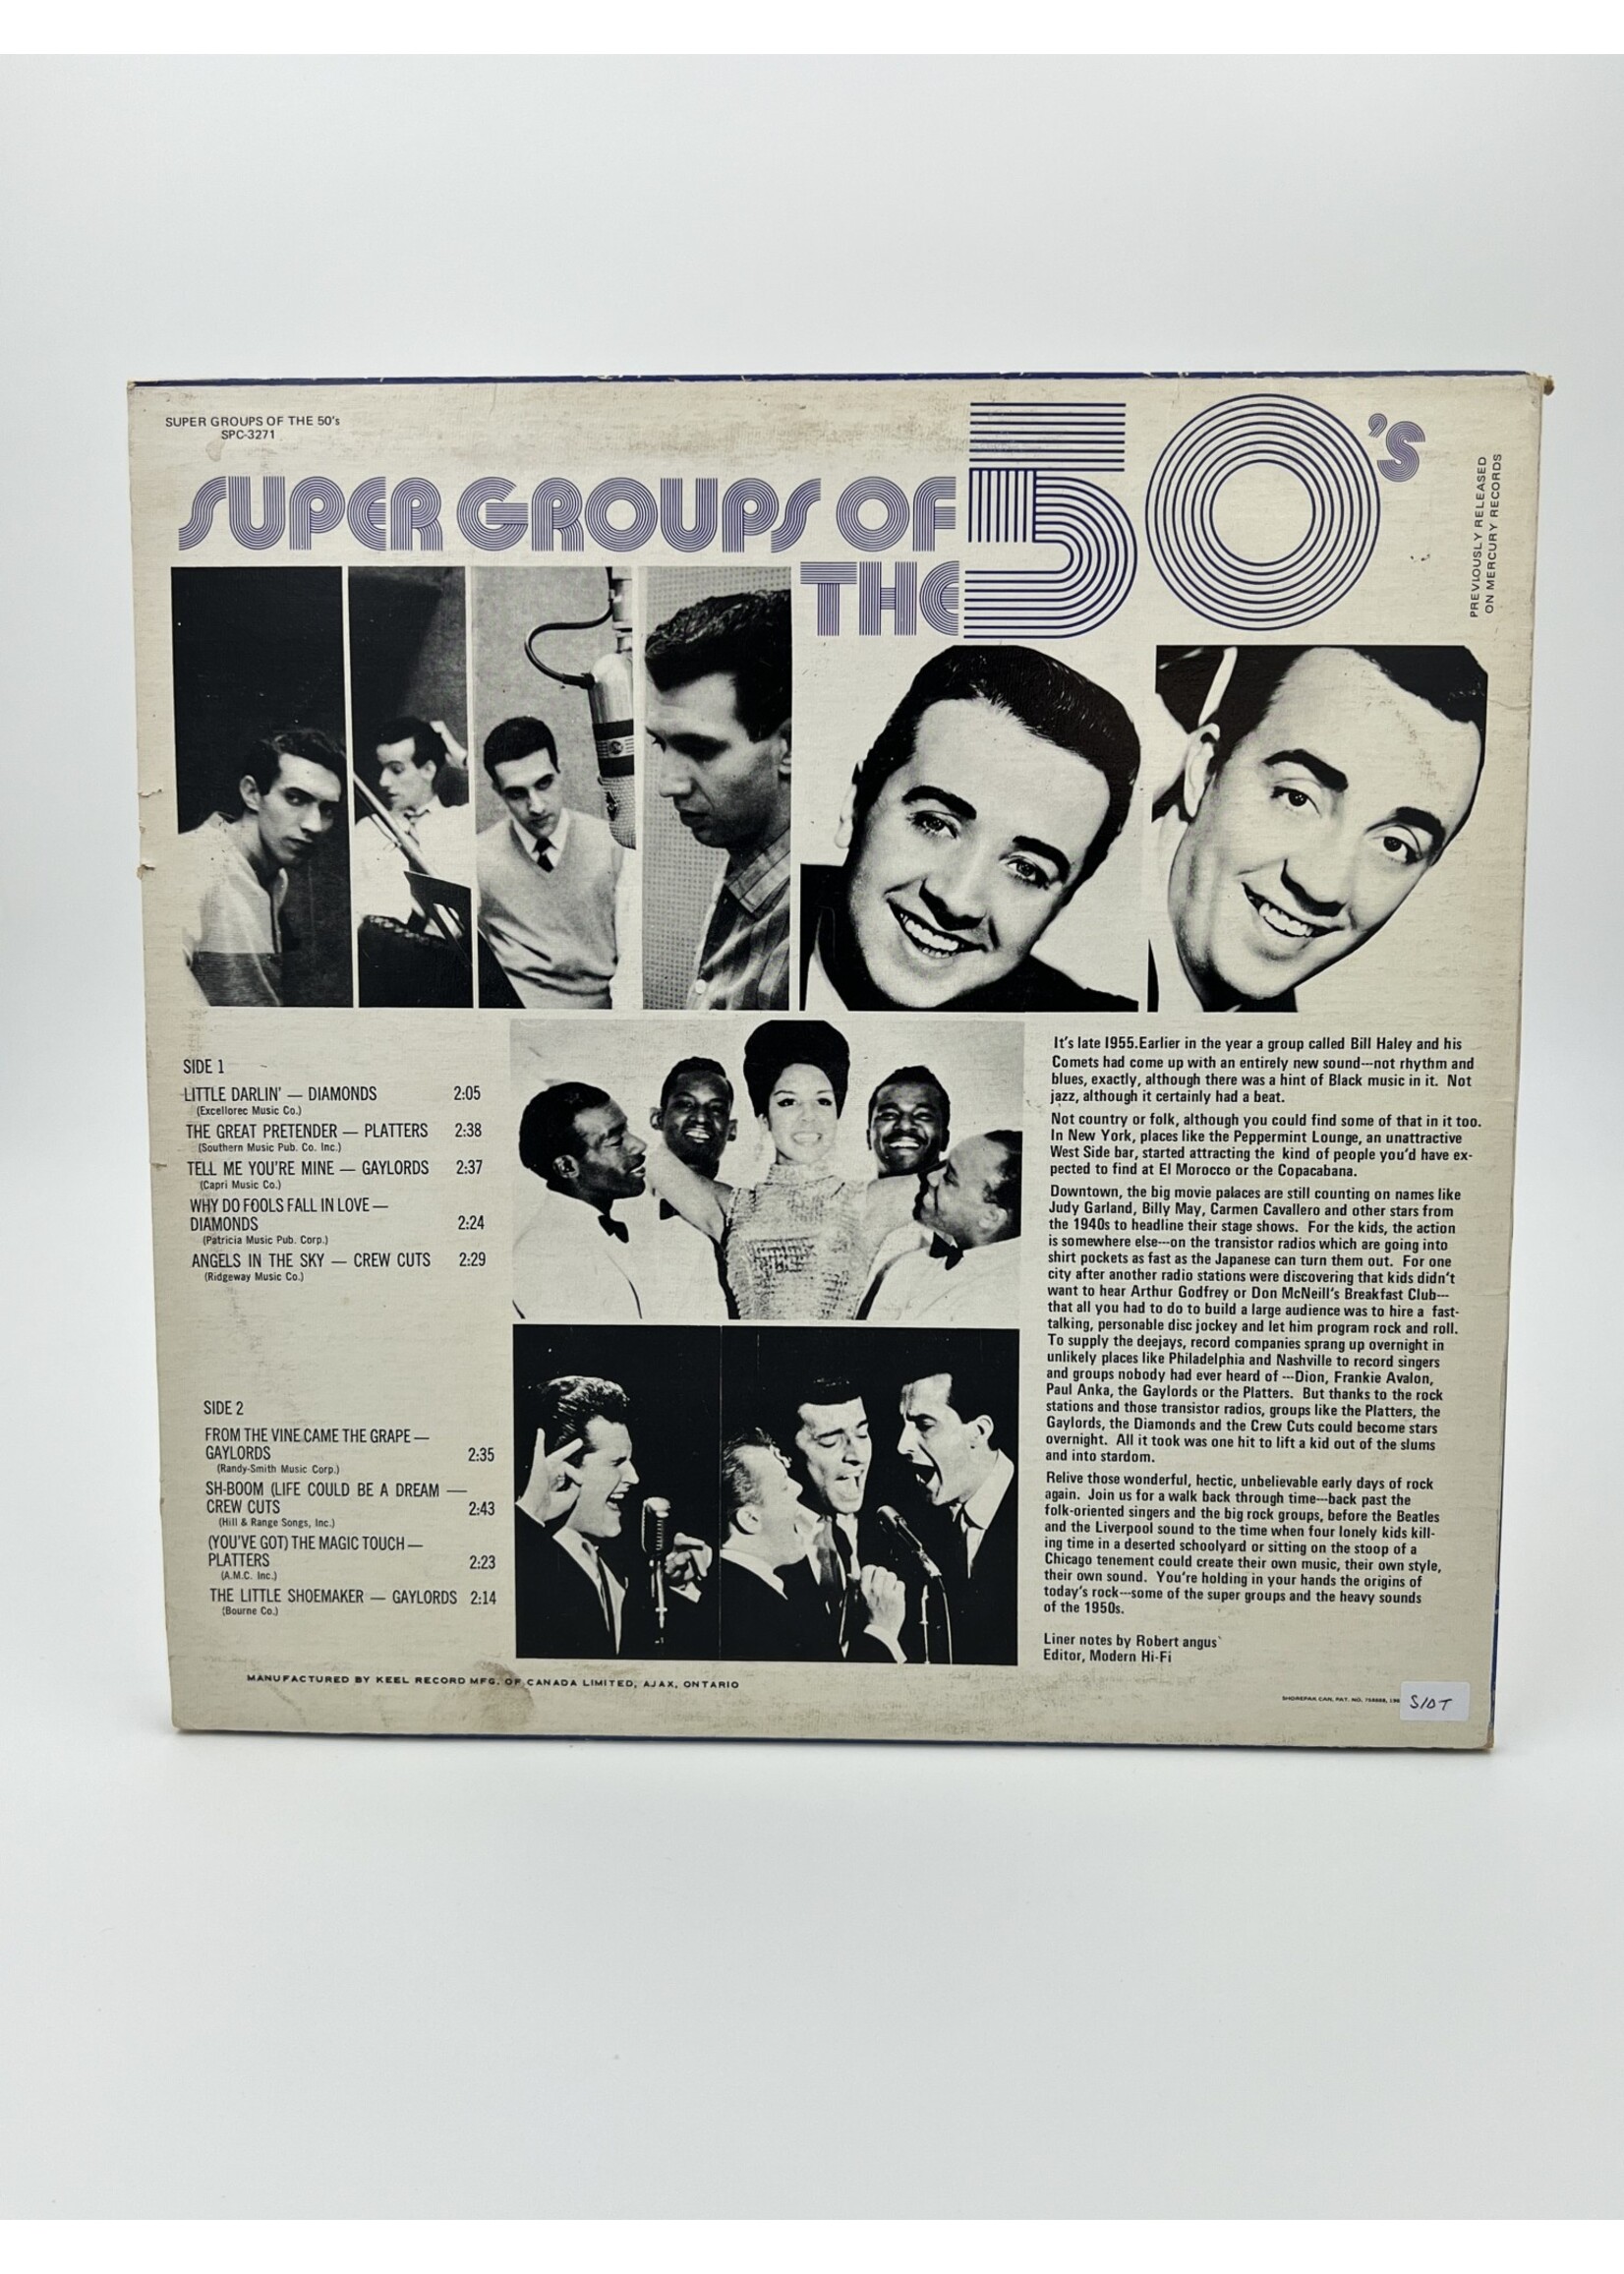 LP   Super Groups Of The 50s Various Artist LP Record